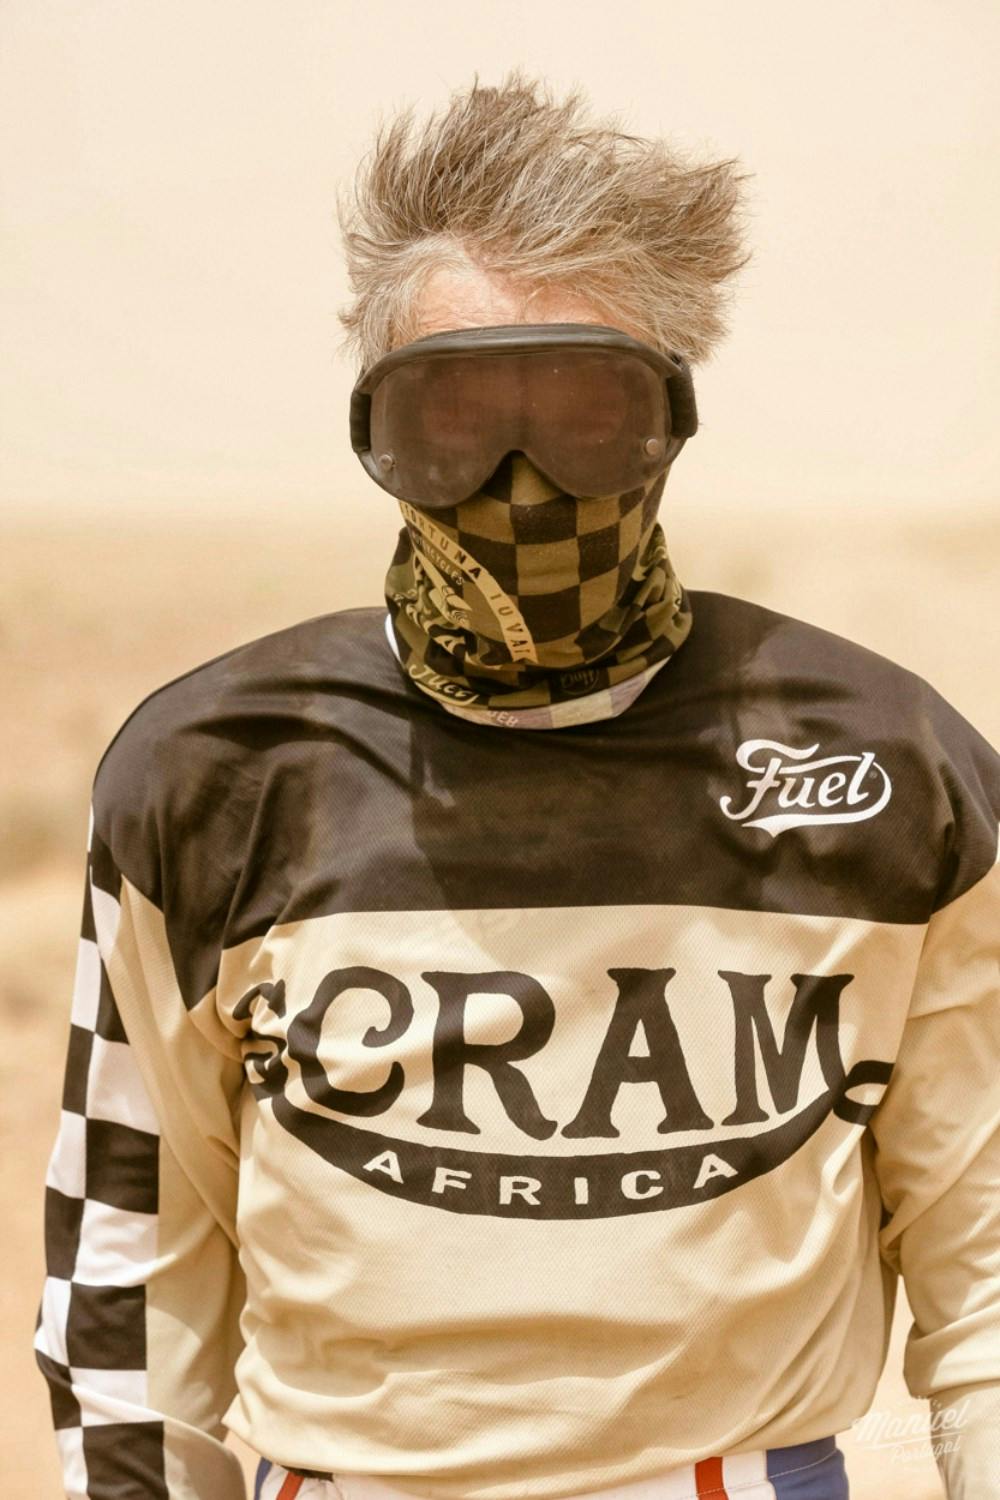 Photo of a rider of the Scram Africa